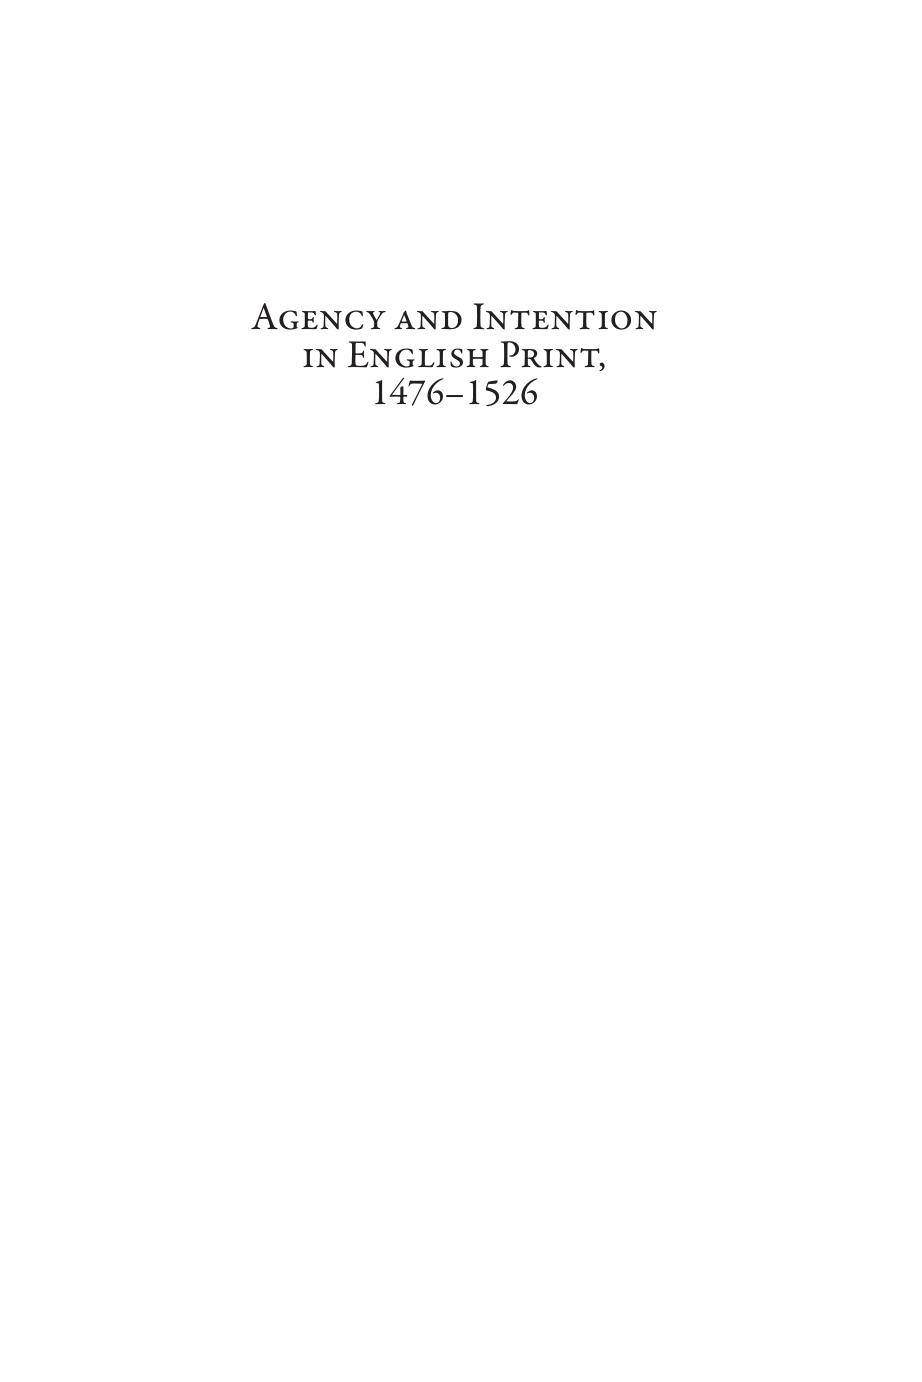 Agency and Intention in English Print, 1476-1526 (Texts and Transitions) by Kathleen Tonry